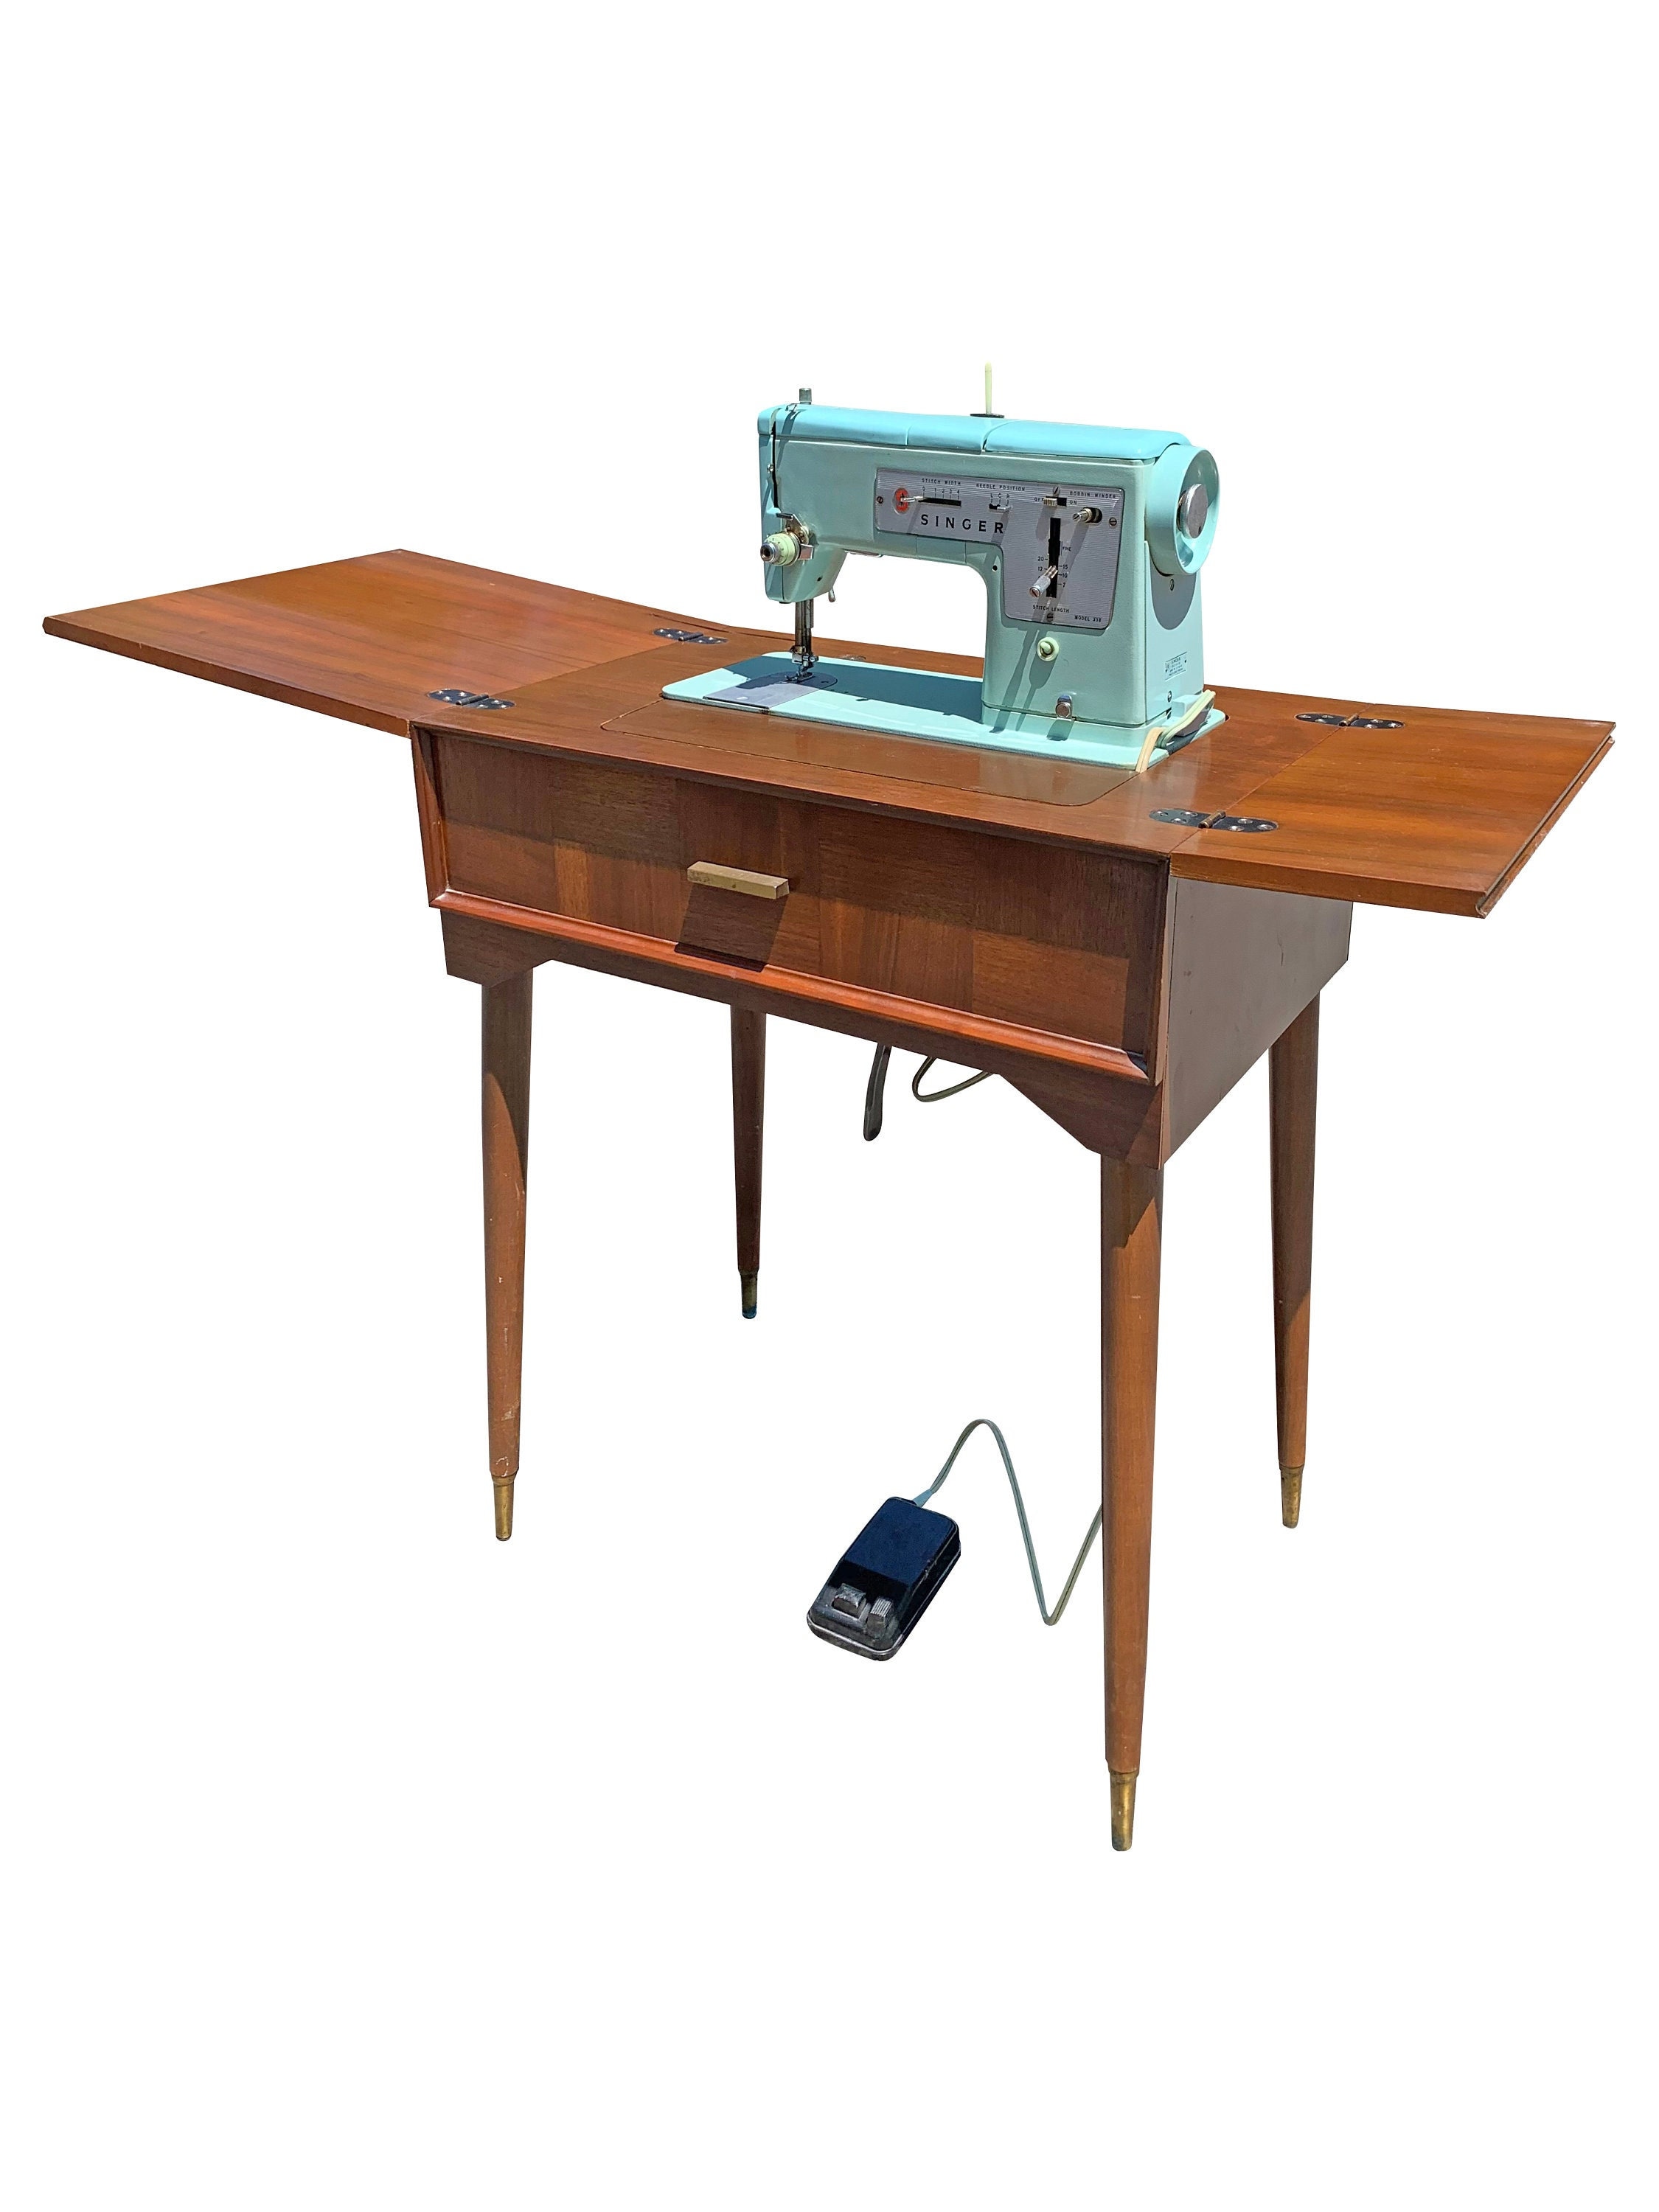 Singer Sewing Machine Table, Chair and Sewing Supplies